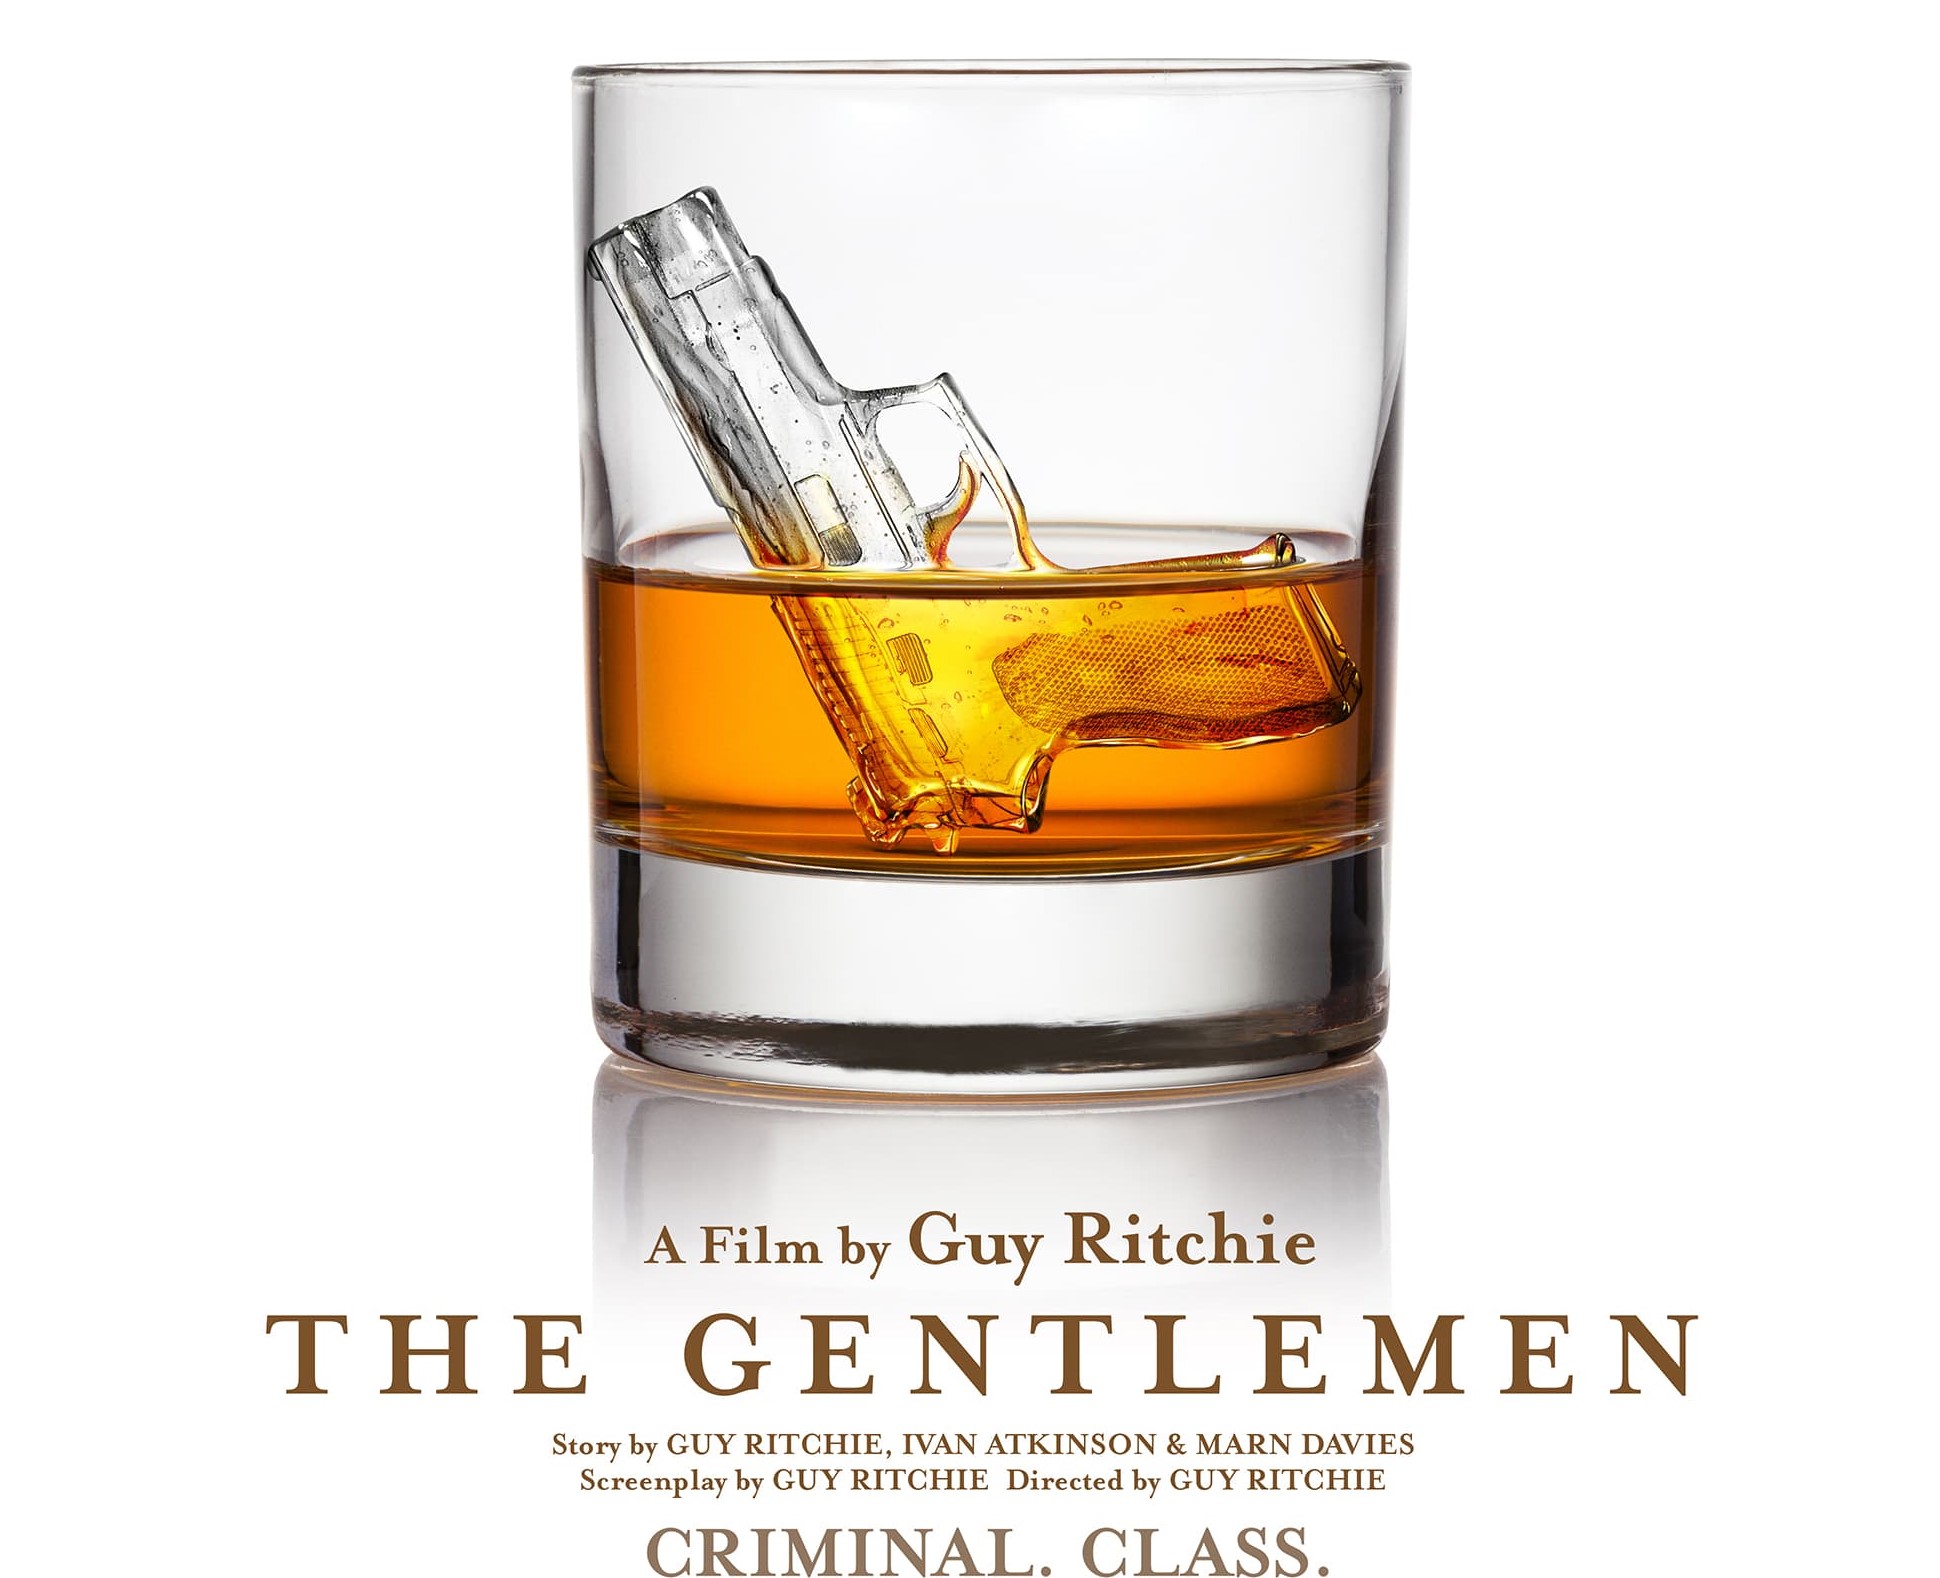 Title: The Gentlemen underneath a glass of whisky with a gun shaped ice cube